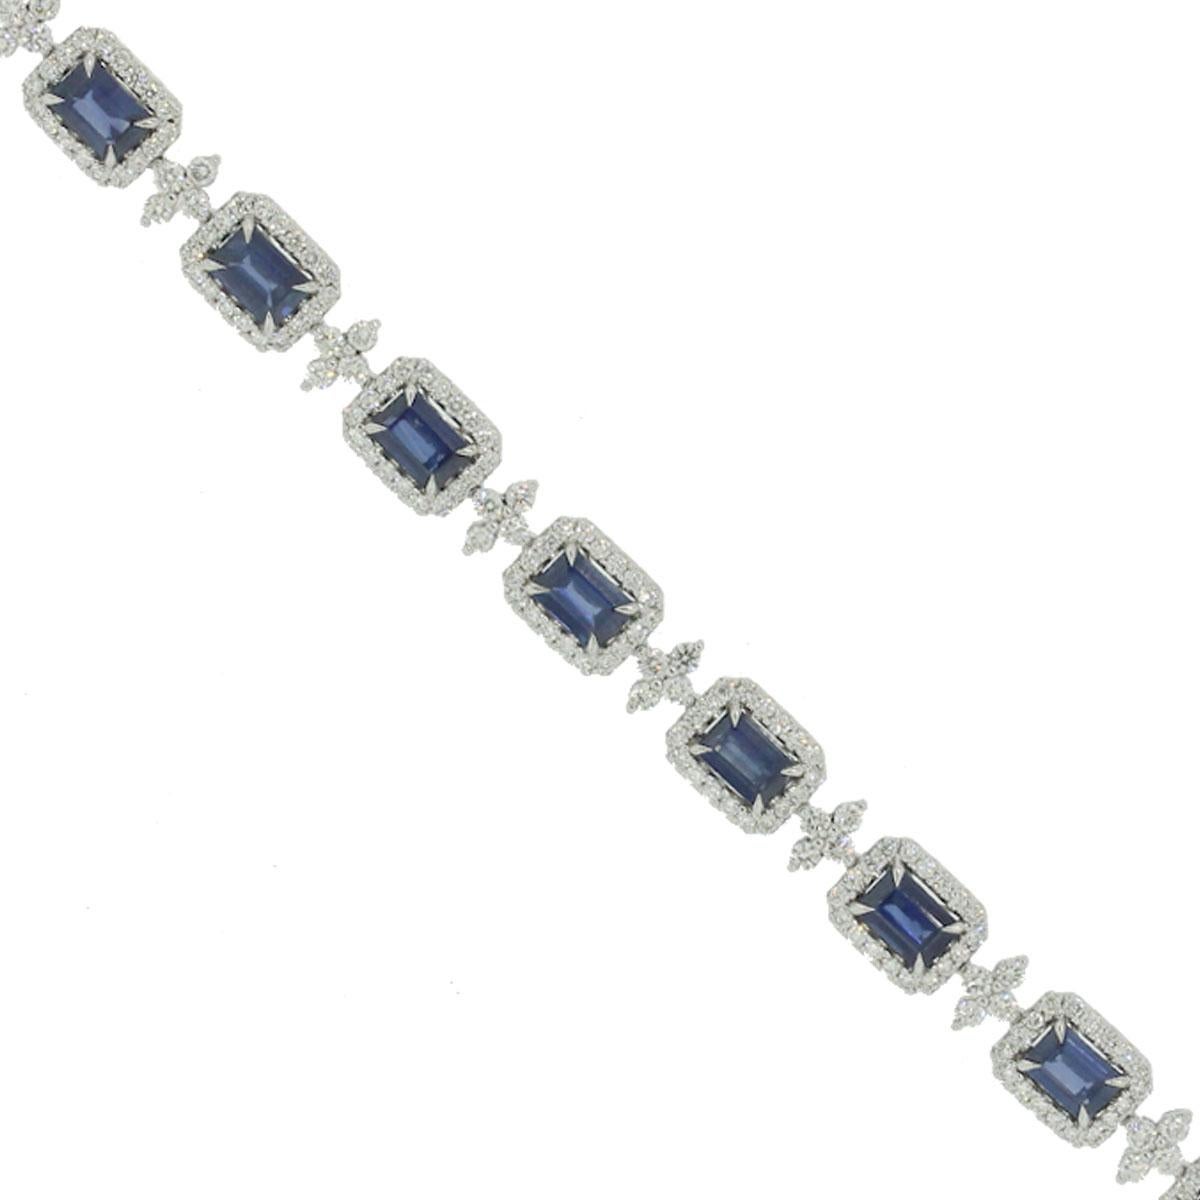 Material-18k White Gold
Gemstone Details-Approx. 8.35ctw Sapphire Gemstones.
Diamond Details-Approx. 3.61ctw of Round cut diamonds. Diamonds are G/H in color and SI in clarity
Measurements-7